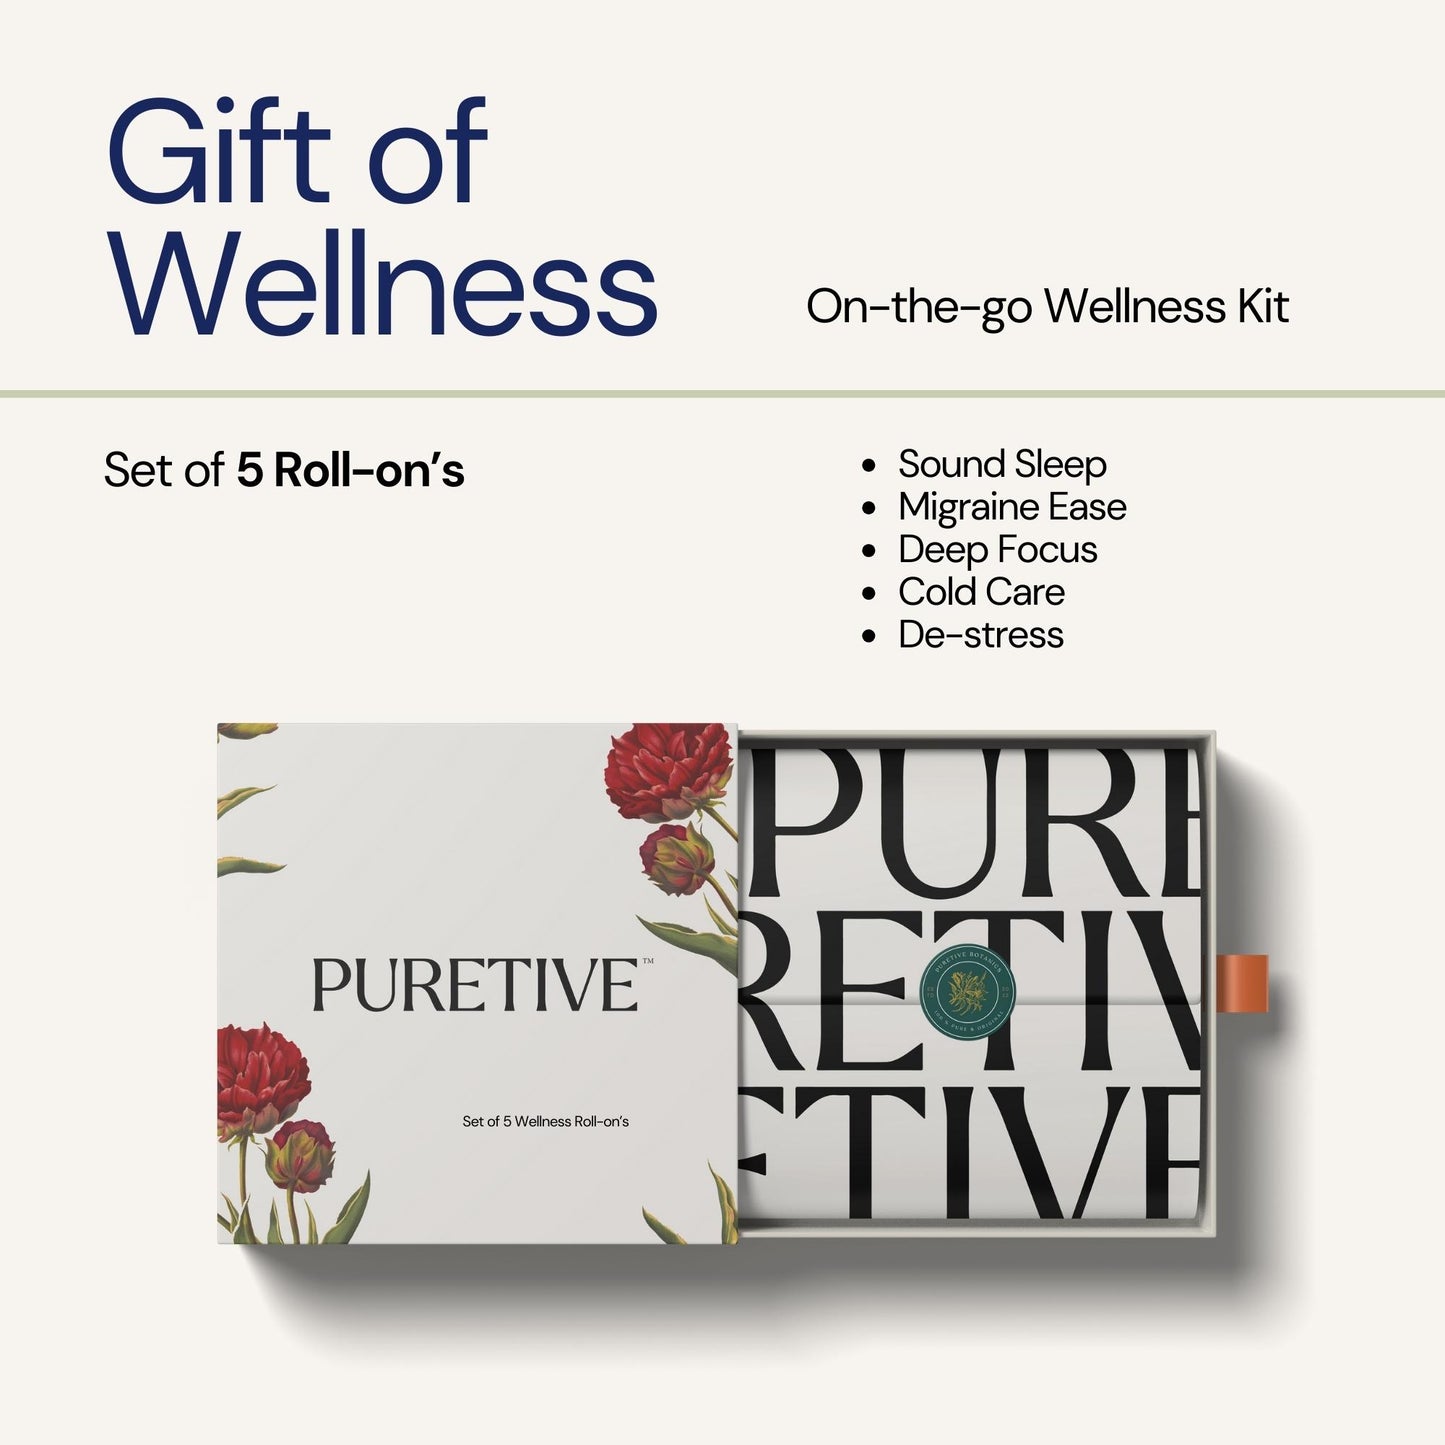 Gift of Wellness : Set of 5 Roll-on's